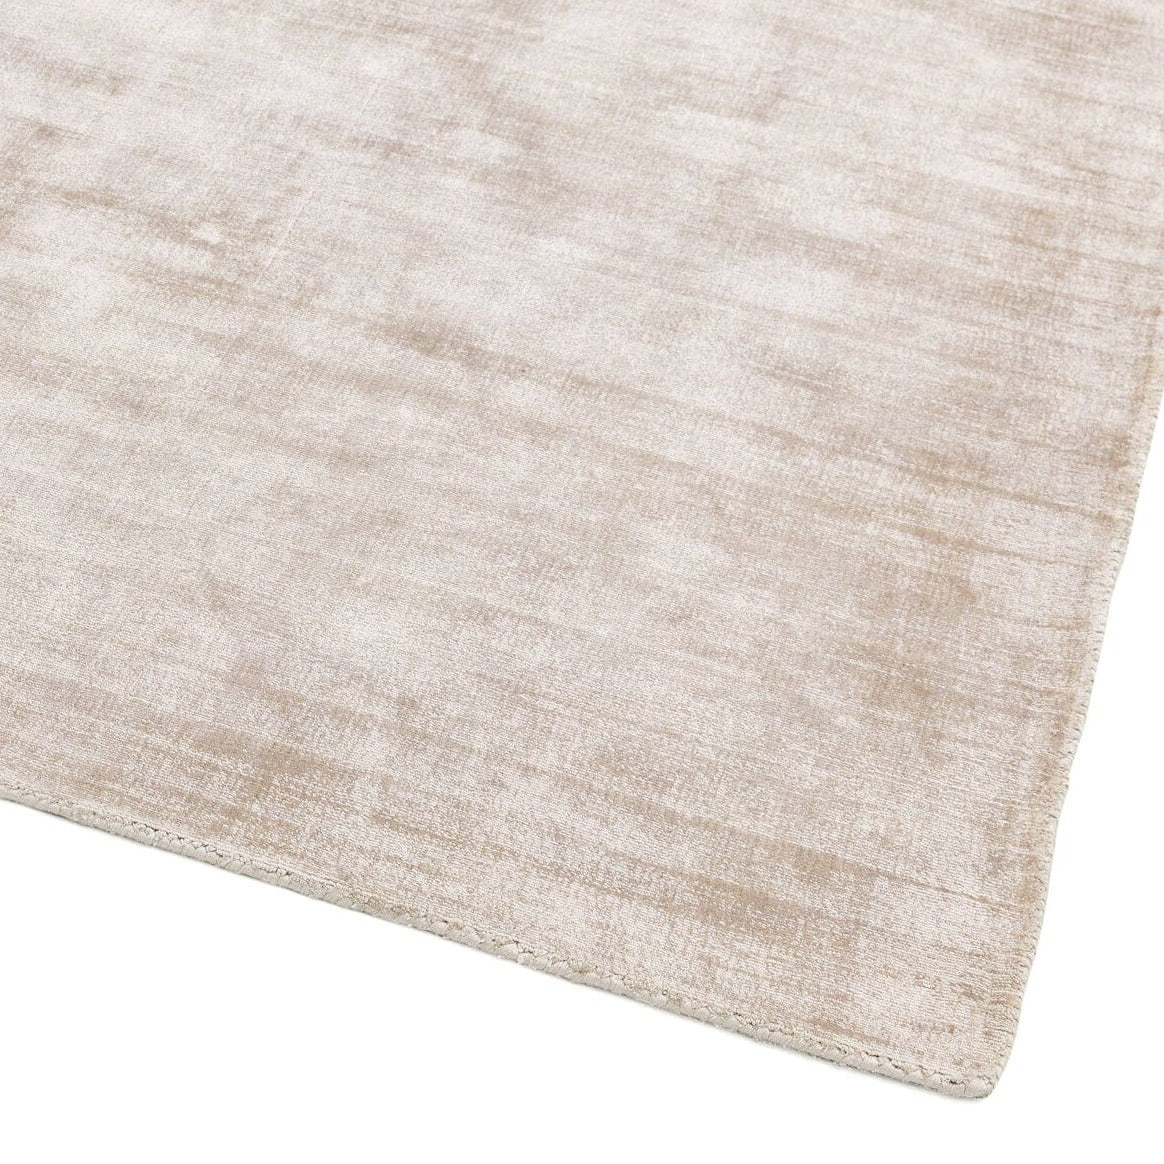  Asiatic Carpets-Asiatic Carpets Blade Hand Woven Rug Putty - 200 x 290cm-Beige, Natural 973 